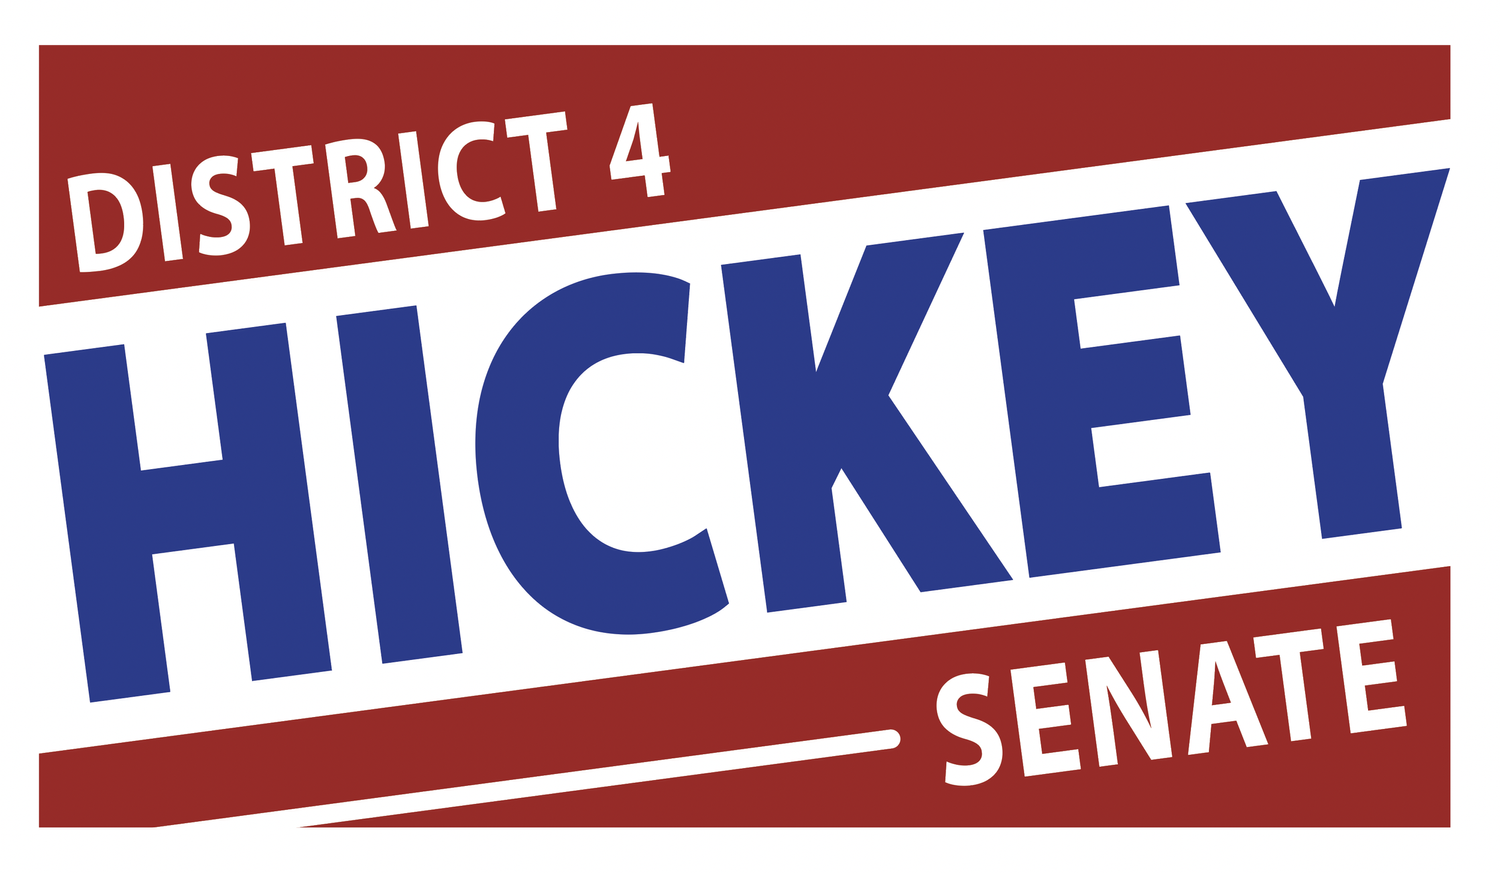 Re-Elect Jimmy Hickey